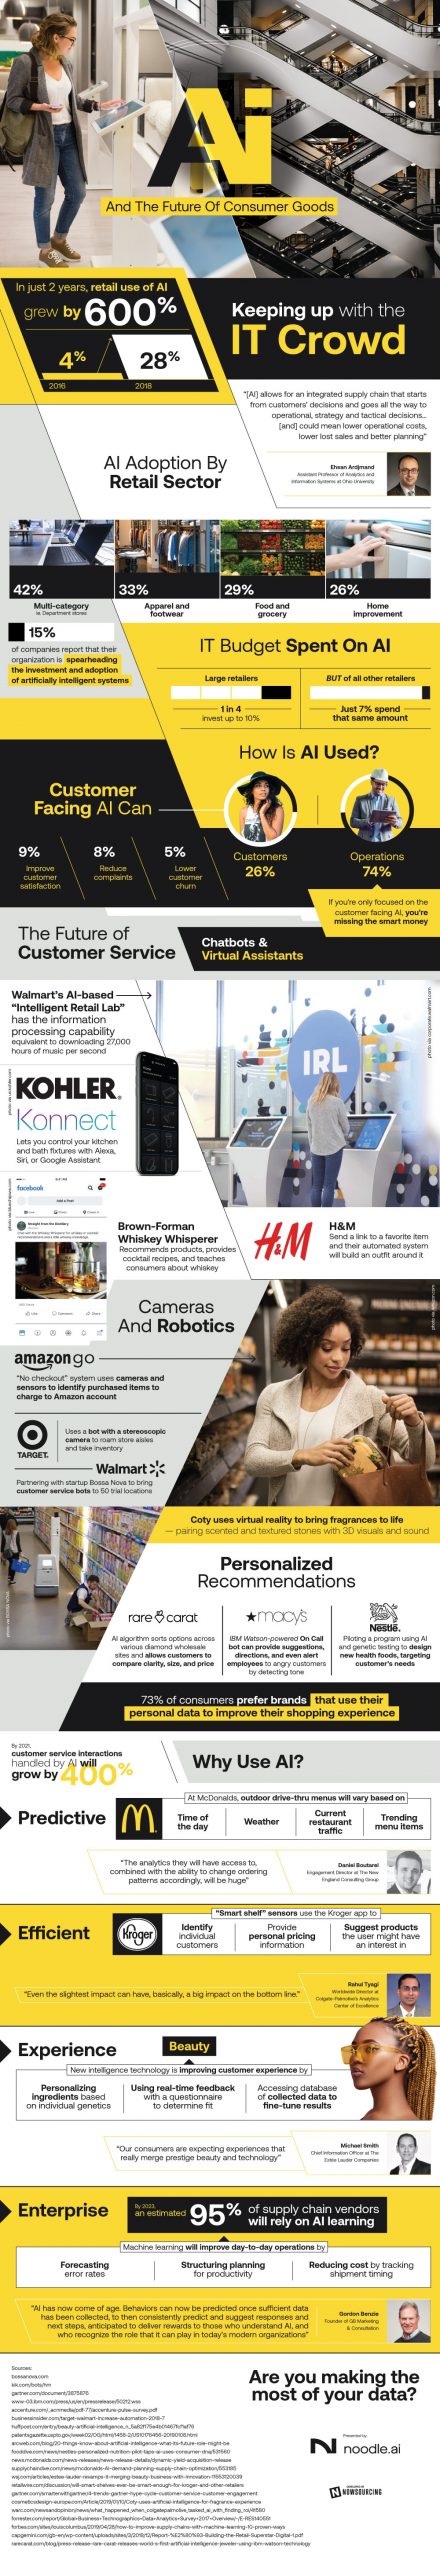 Implementing AI To Strengthen Consumer Goods [Infographic] | DeviceDaily.com